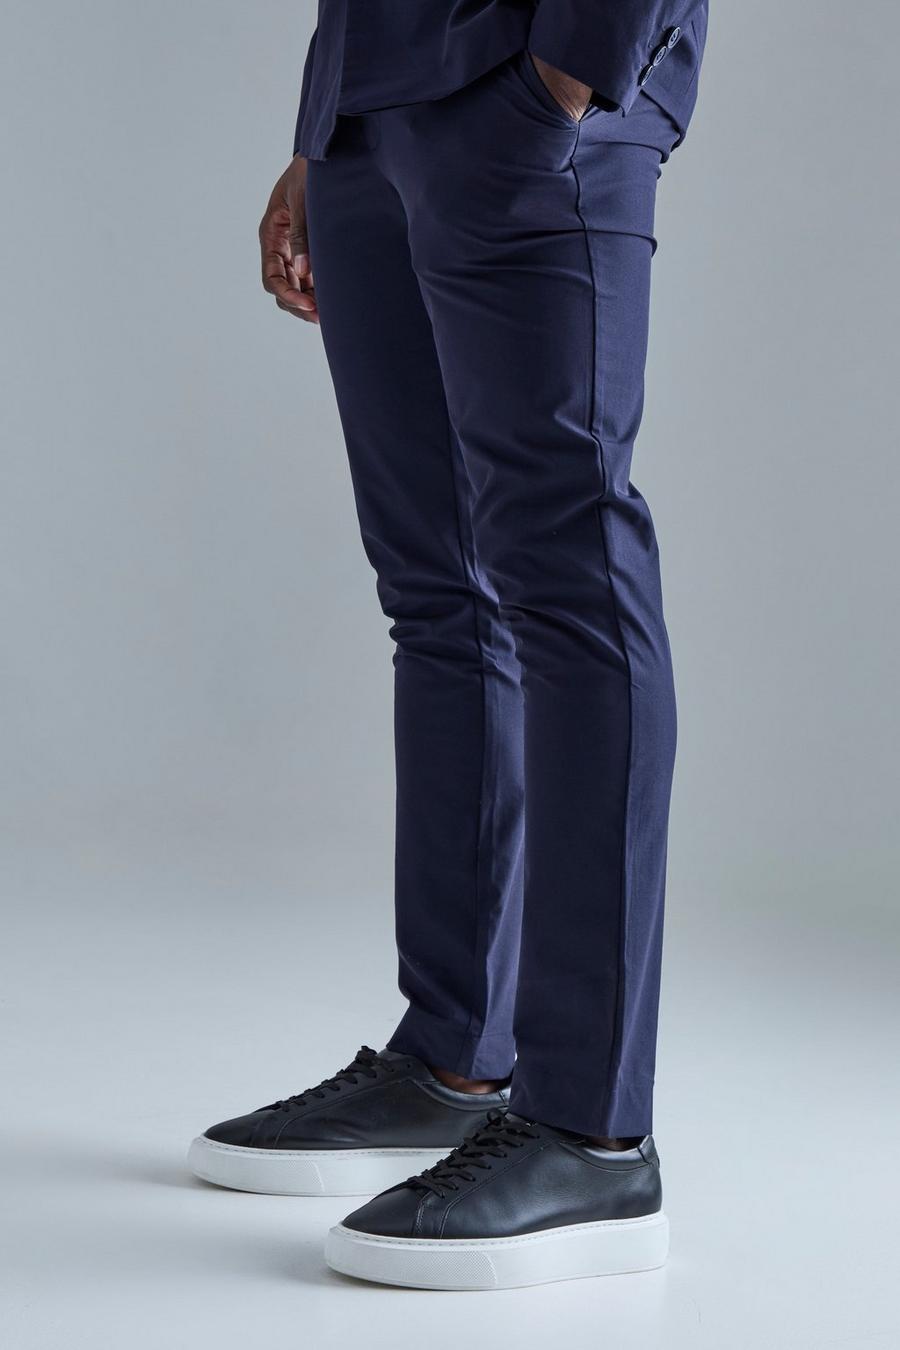 Navy Stretch Tailored Slim Fit Trousers